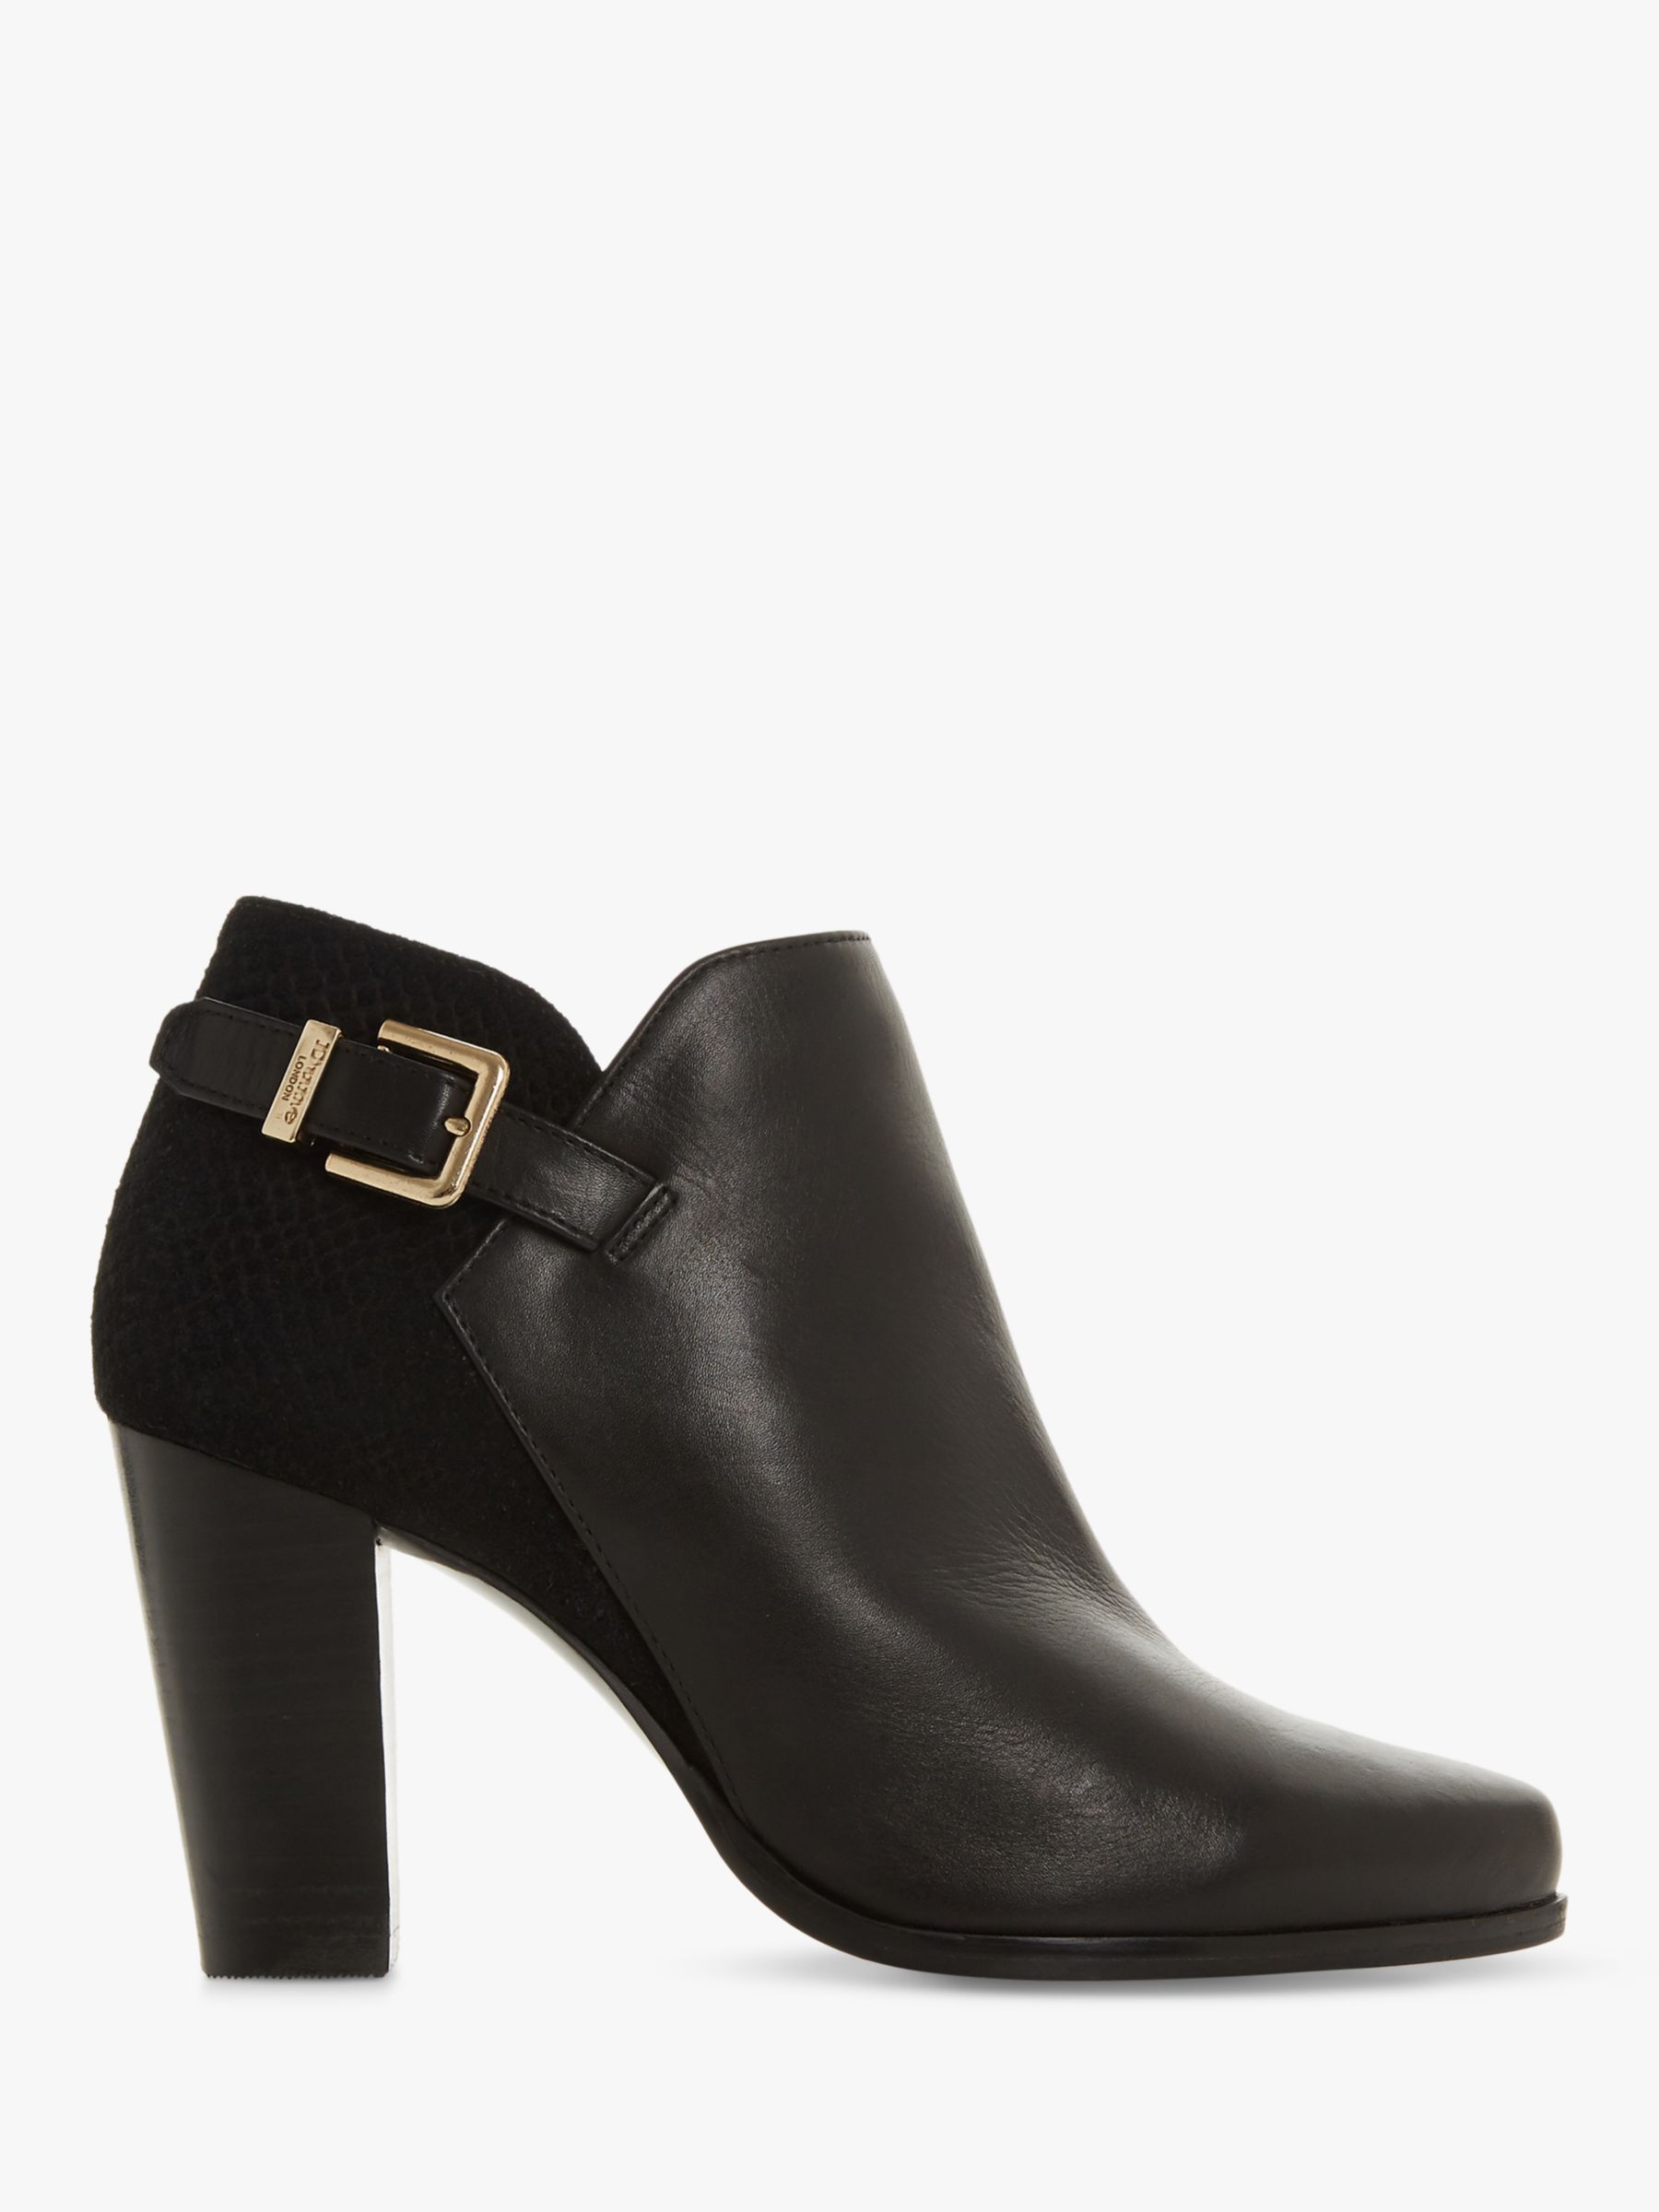 Dune Oleria Wide Fit Ankle Boots